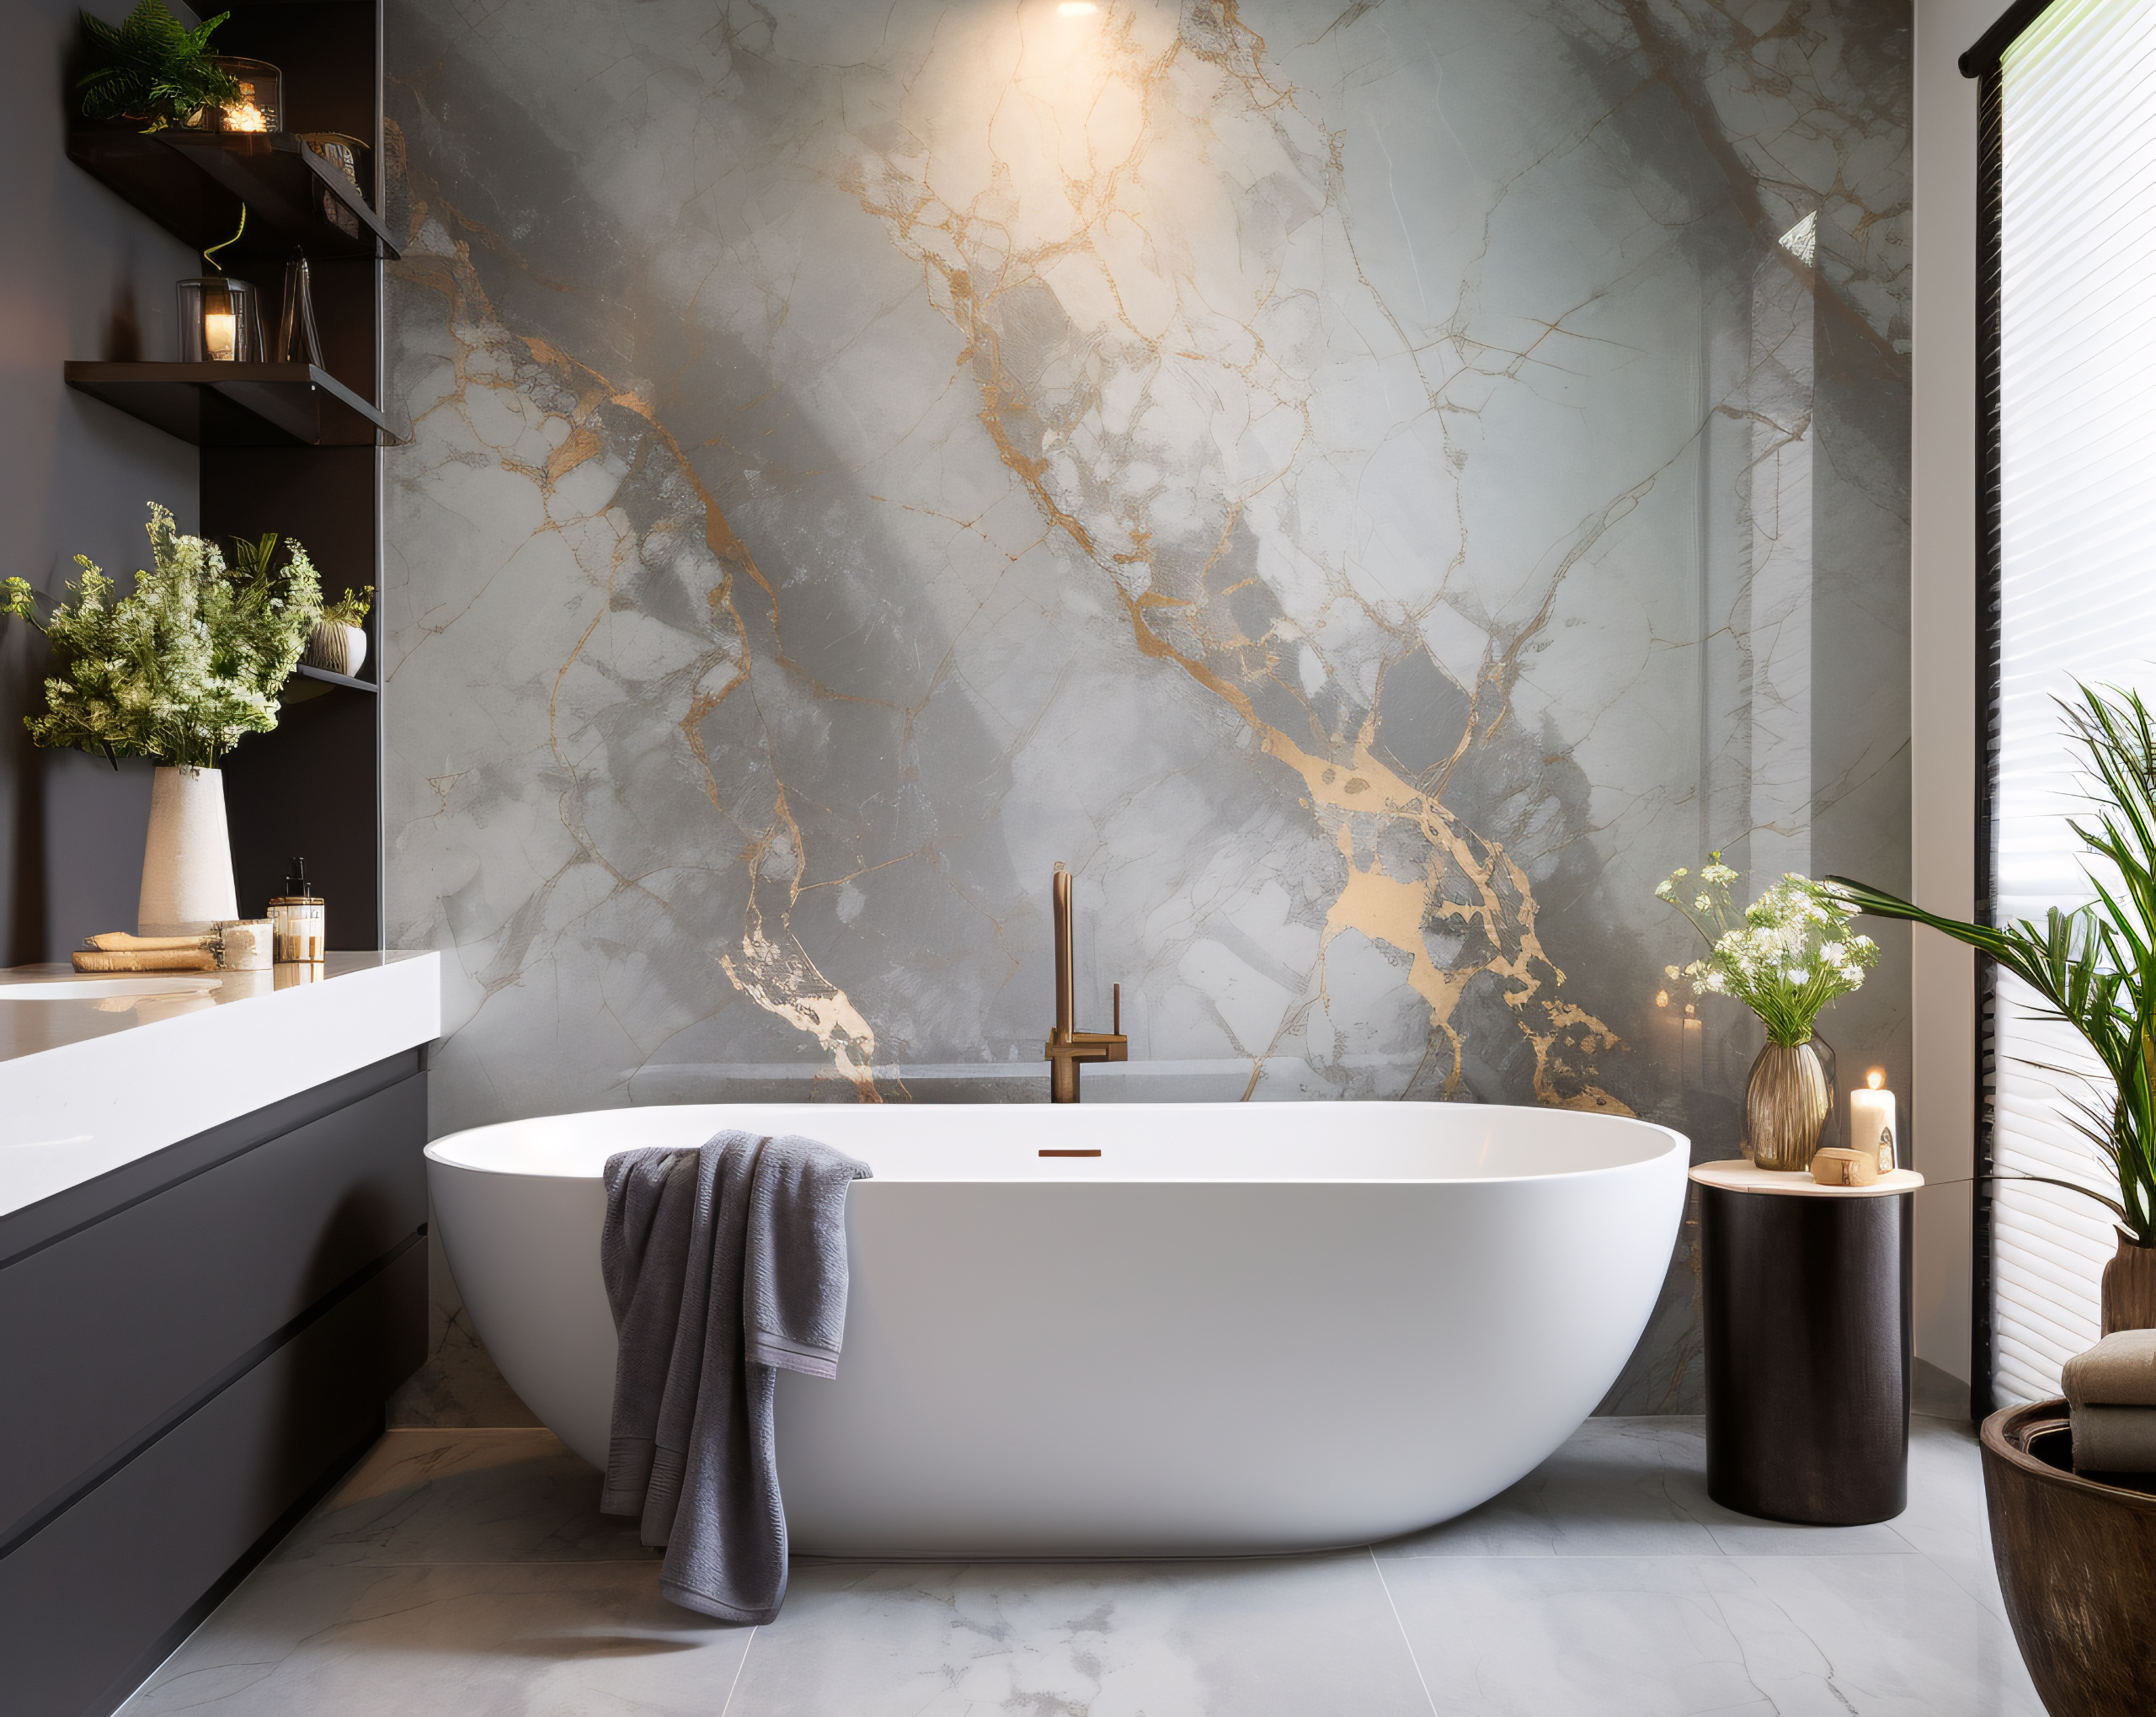 jjc3465_ensuite_bathroom_with_bookmatched_marble_feature_wall_w_5fd4b850-6fb6-4e5e-bba1-44c6e0f4e996 (1)_upscayl_4x_ultramix_balanced